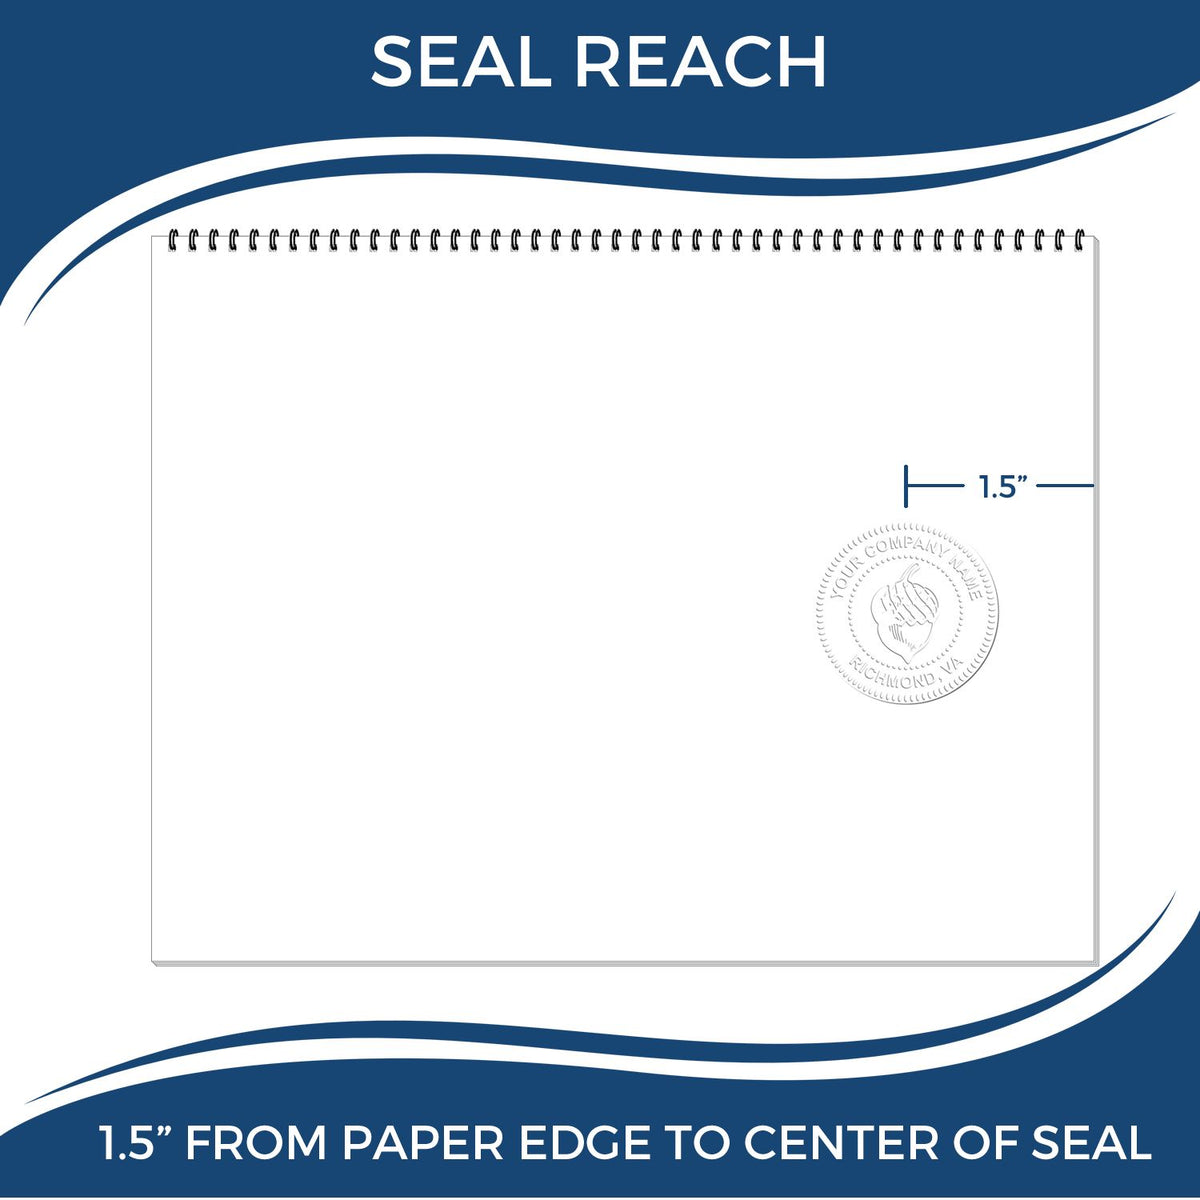 An infographic showing the seal reach which is represented by a ruler and a miniature seal image of the Hybrid Vermont Geologist Seal